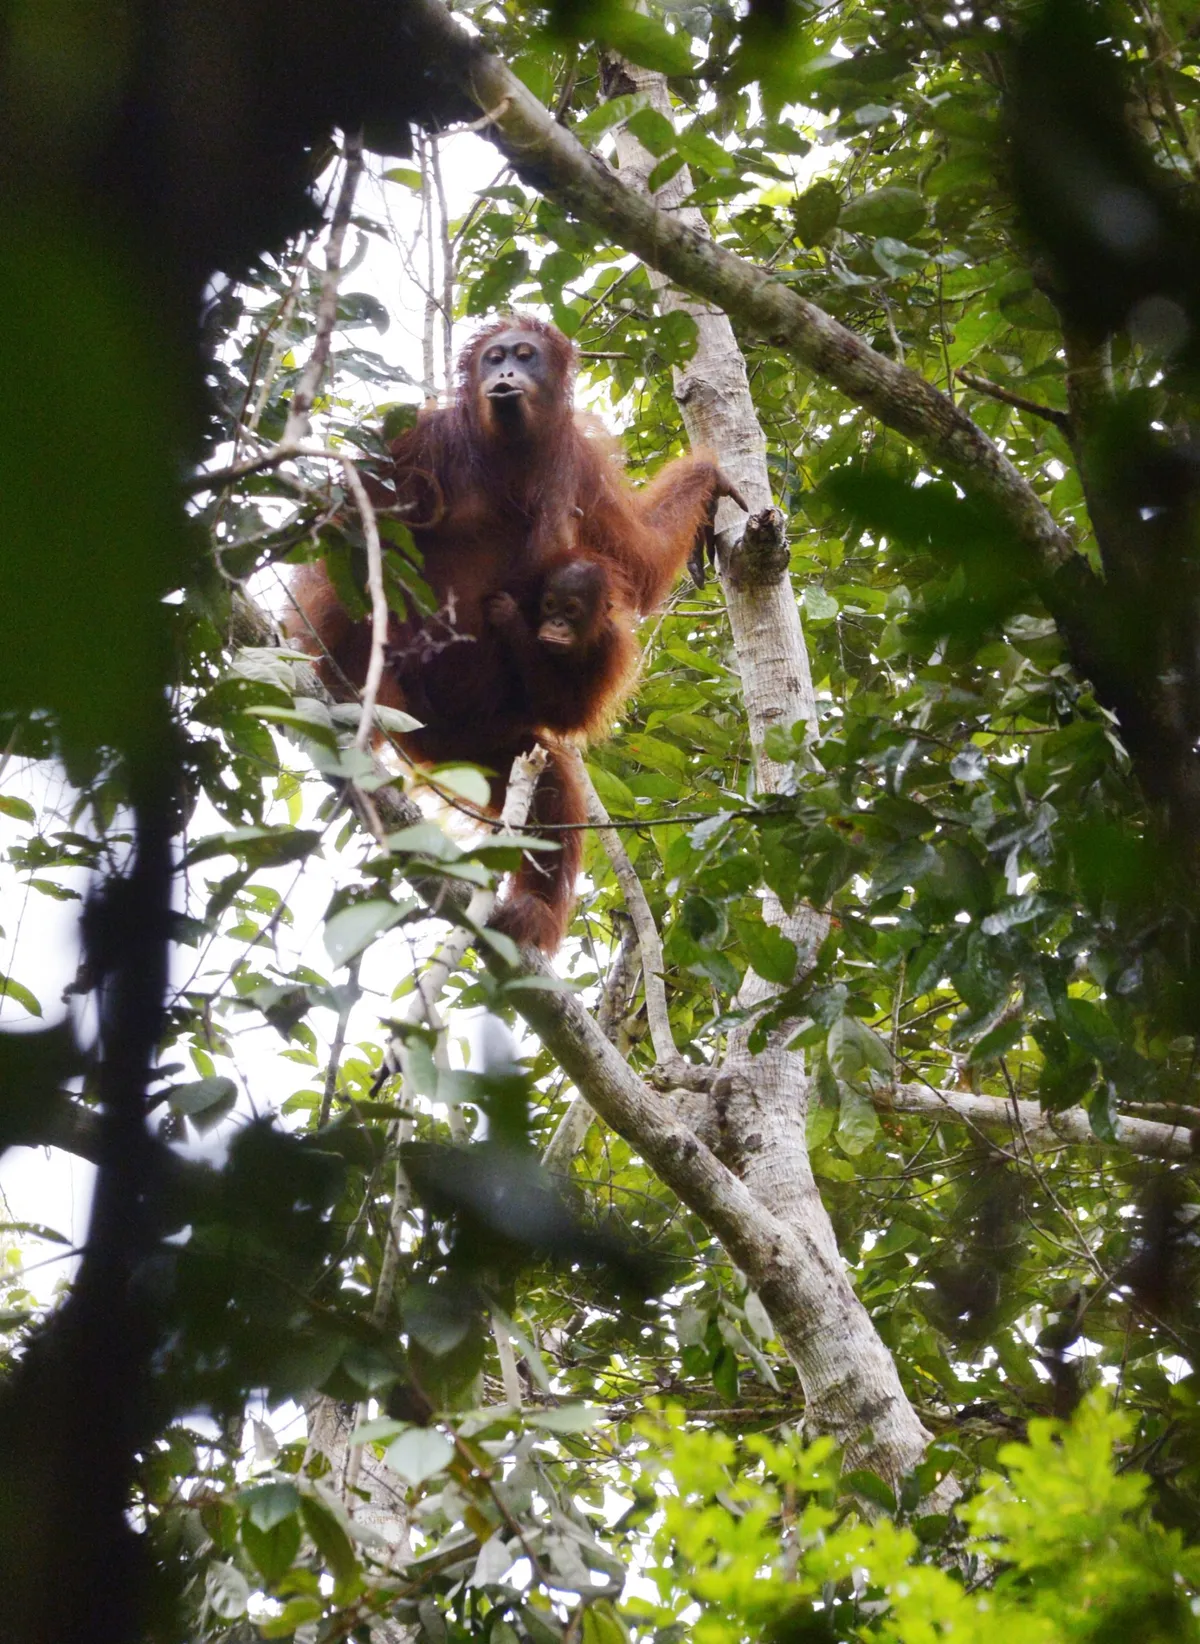 A baby orangutan clings tightly to its mother in the canopy near Nanga Sumpa longhouse. © Mark Eveleigh